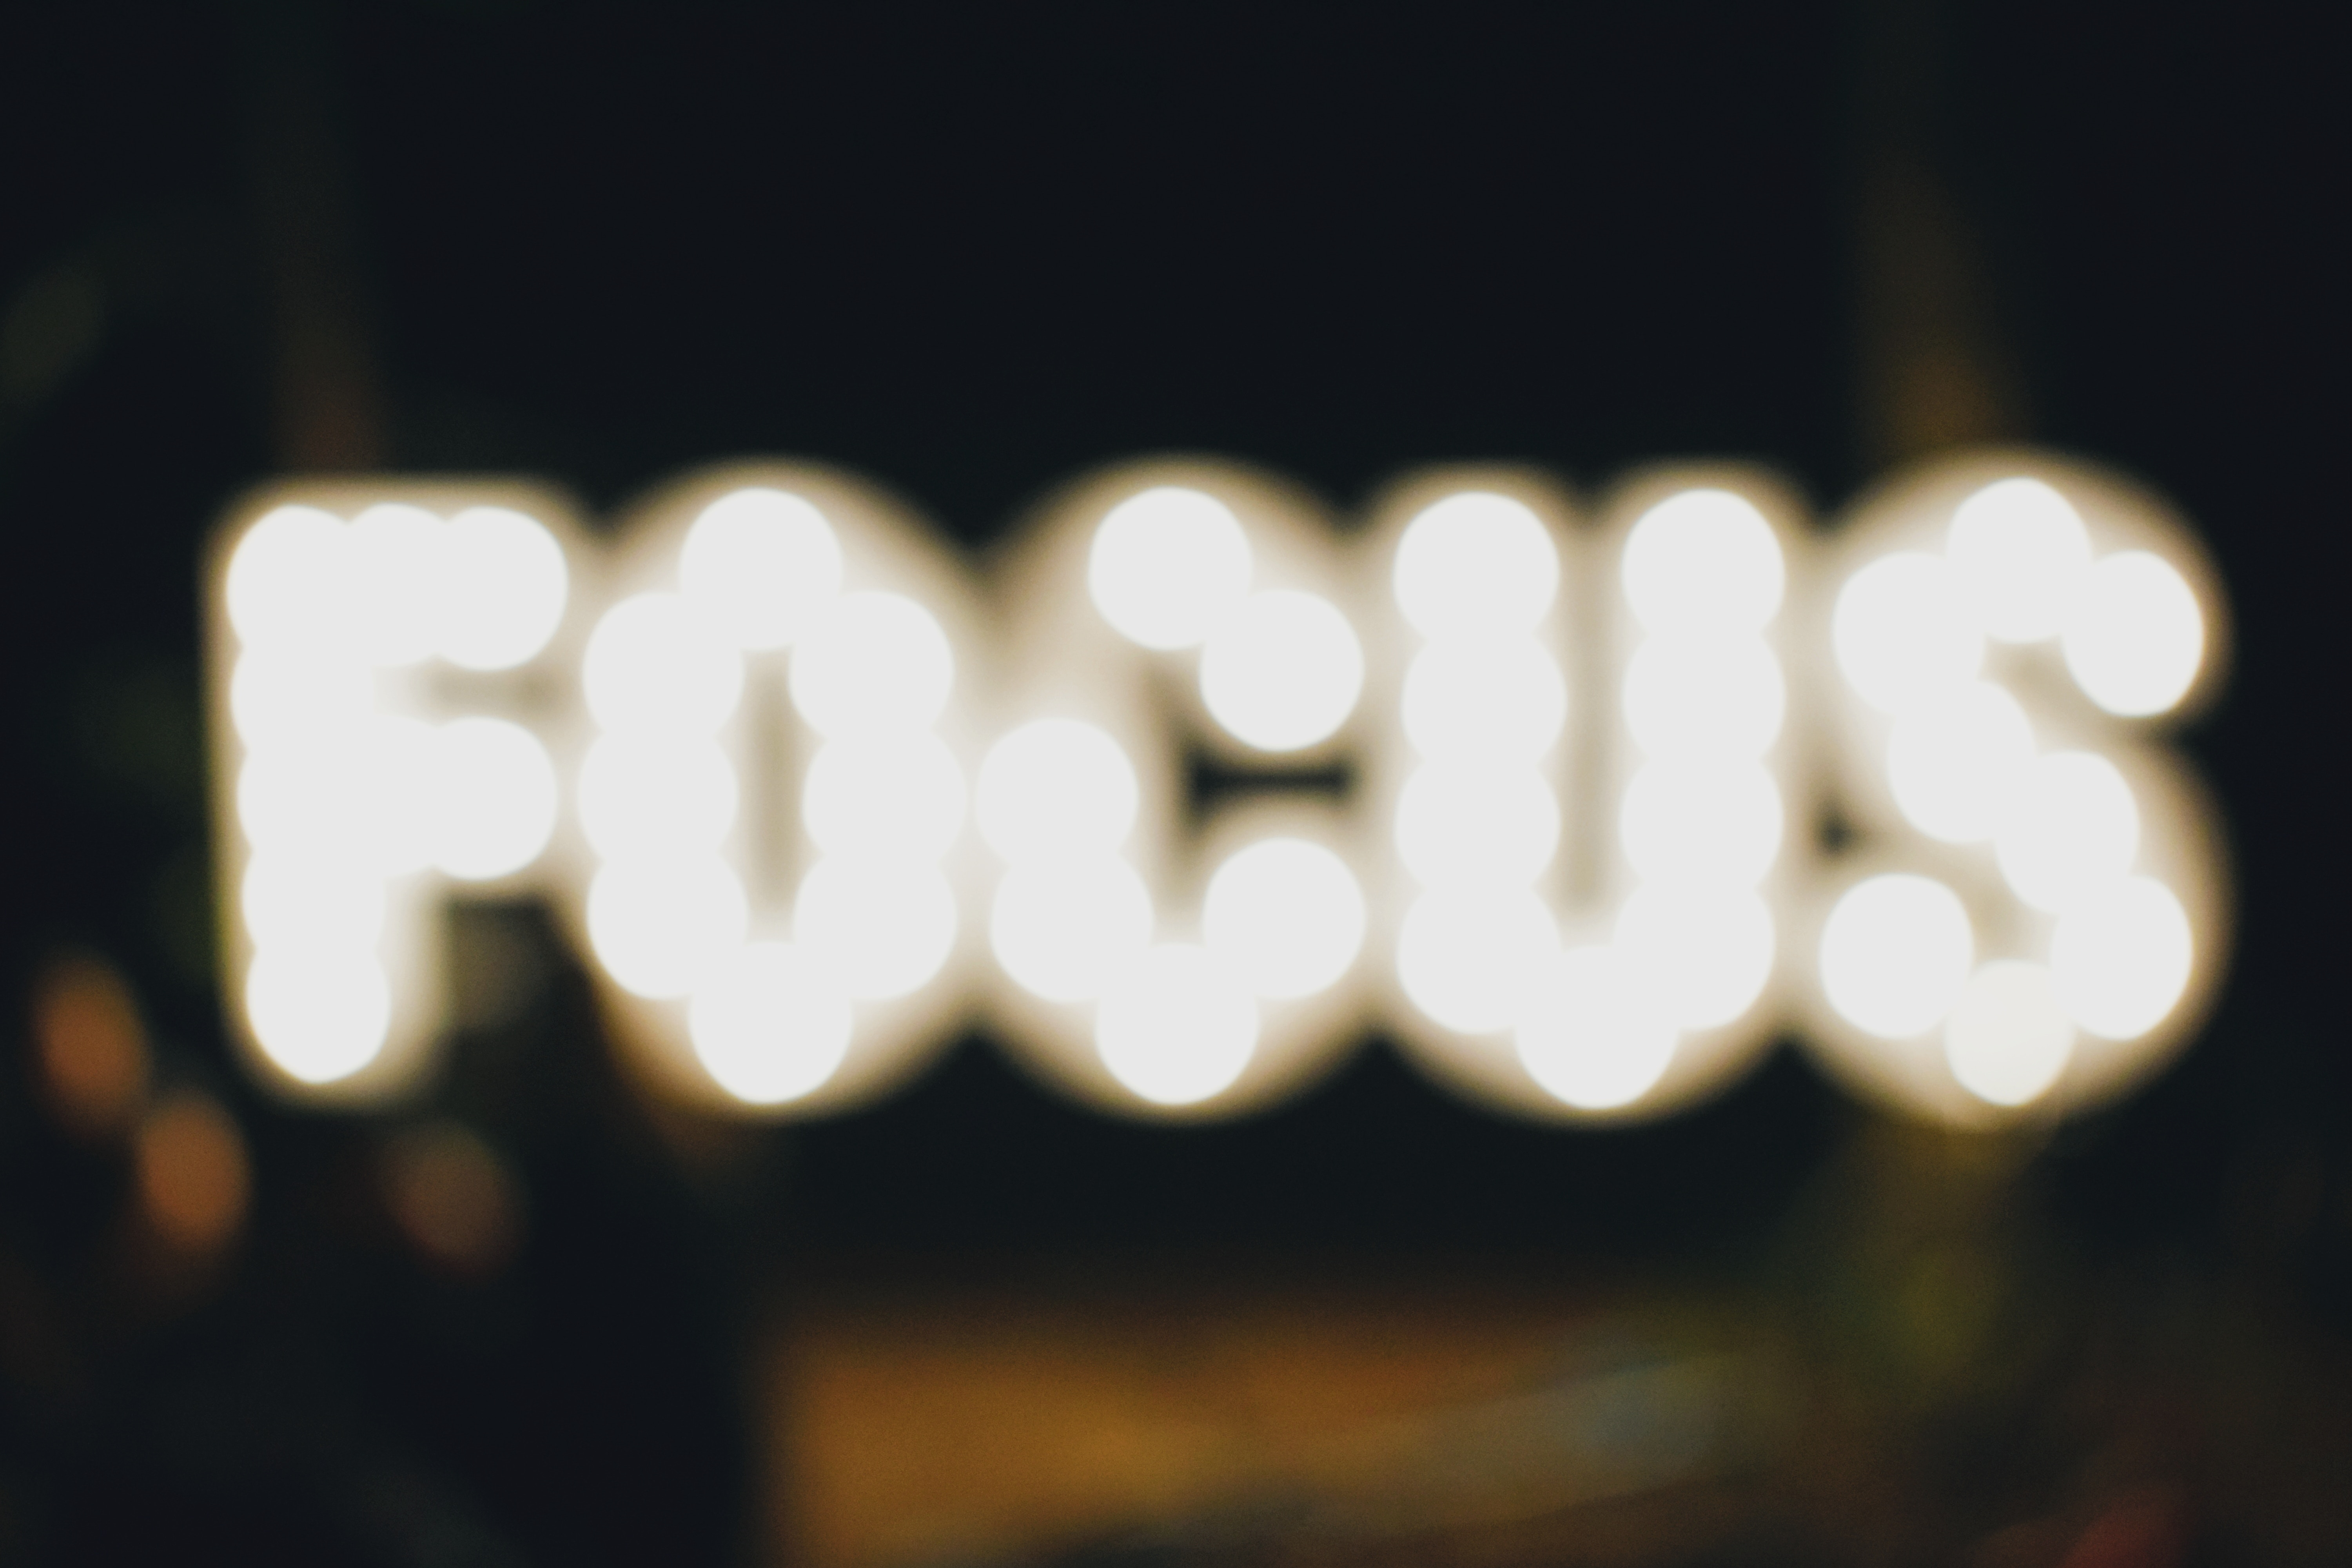 how to improve focus? how to increase attention span?